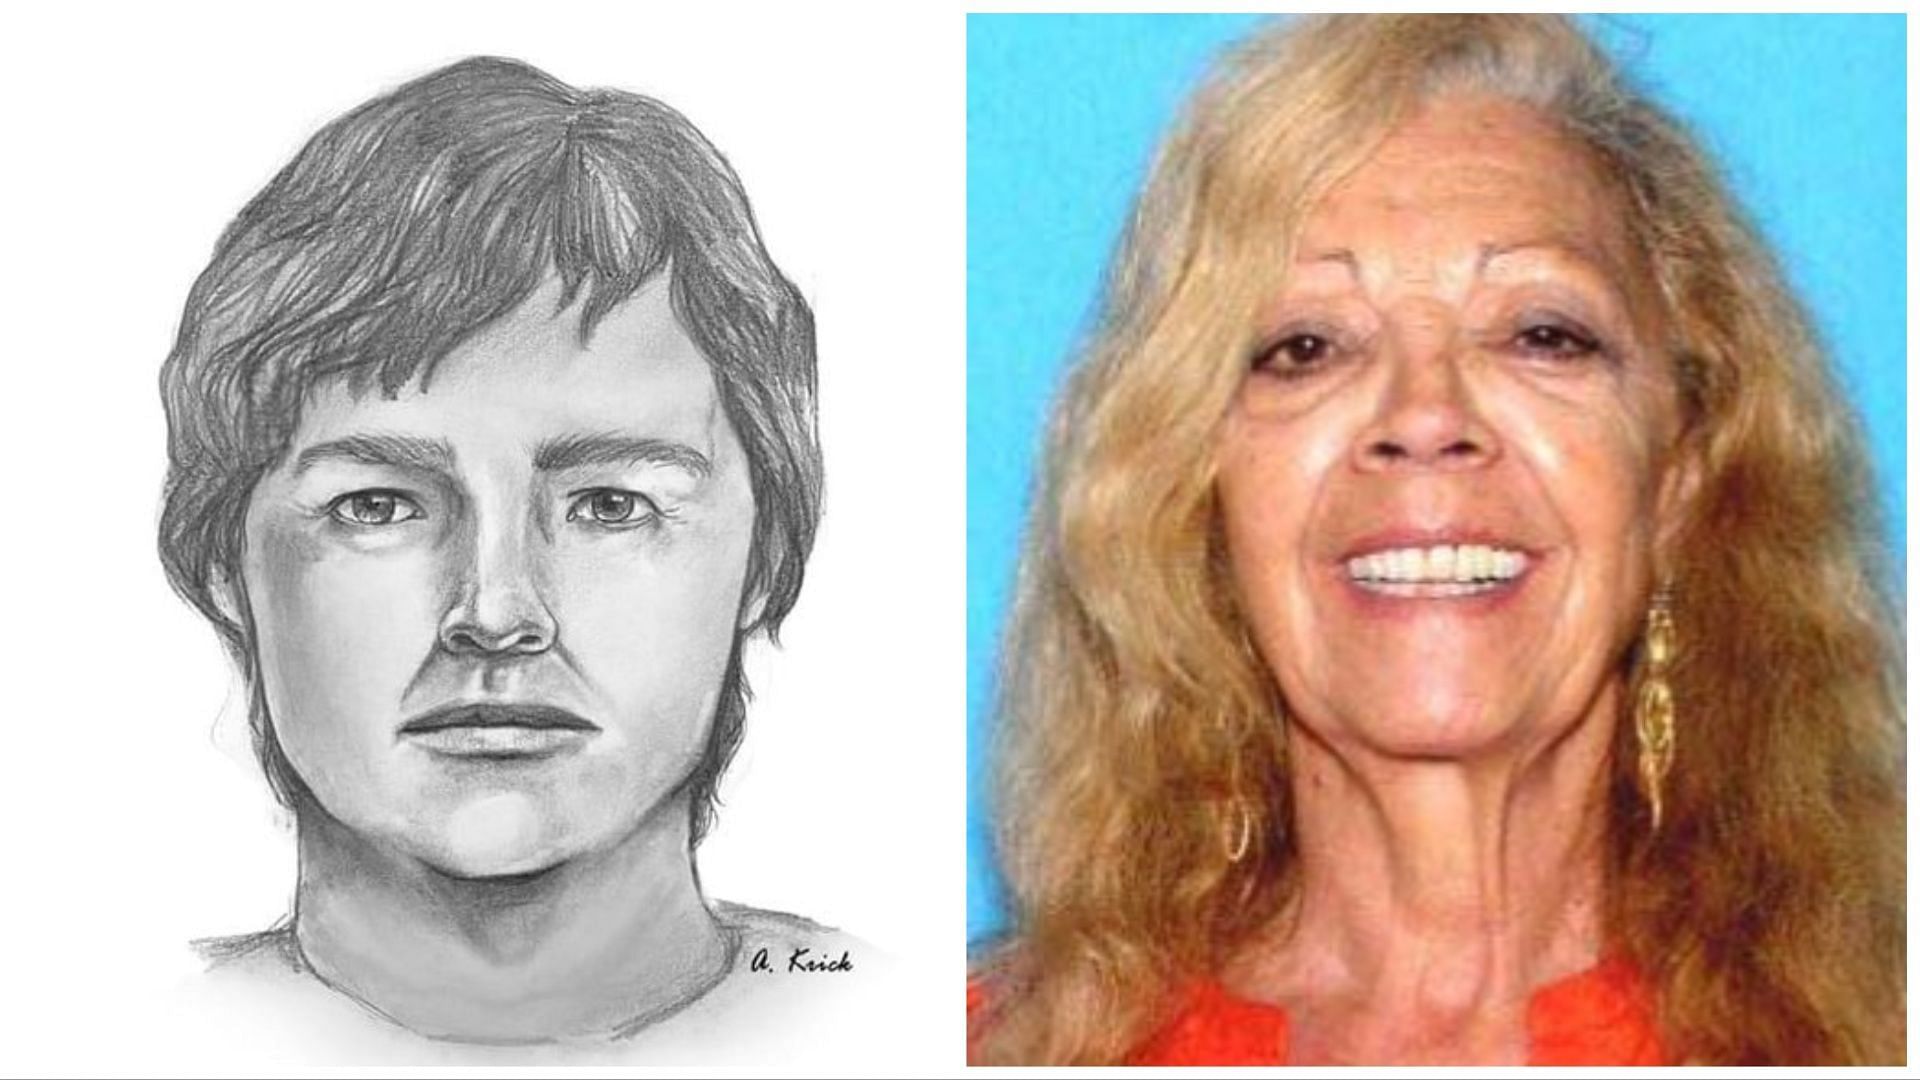 Police revealed the sketch of a suspect who could be the driver that picked up Assunta in 2018, shortly before her disappearance, (Images via TreasureCoast.com and Central Florida Missing Persons/Twitter)